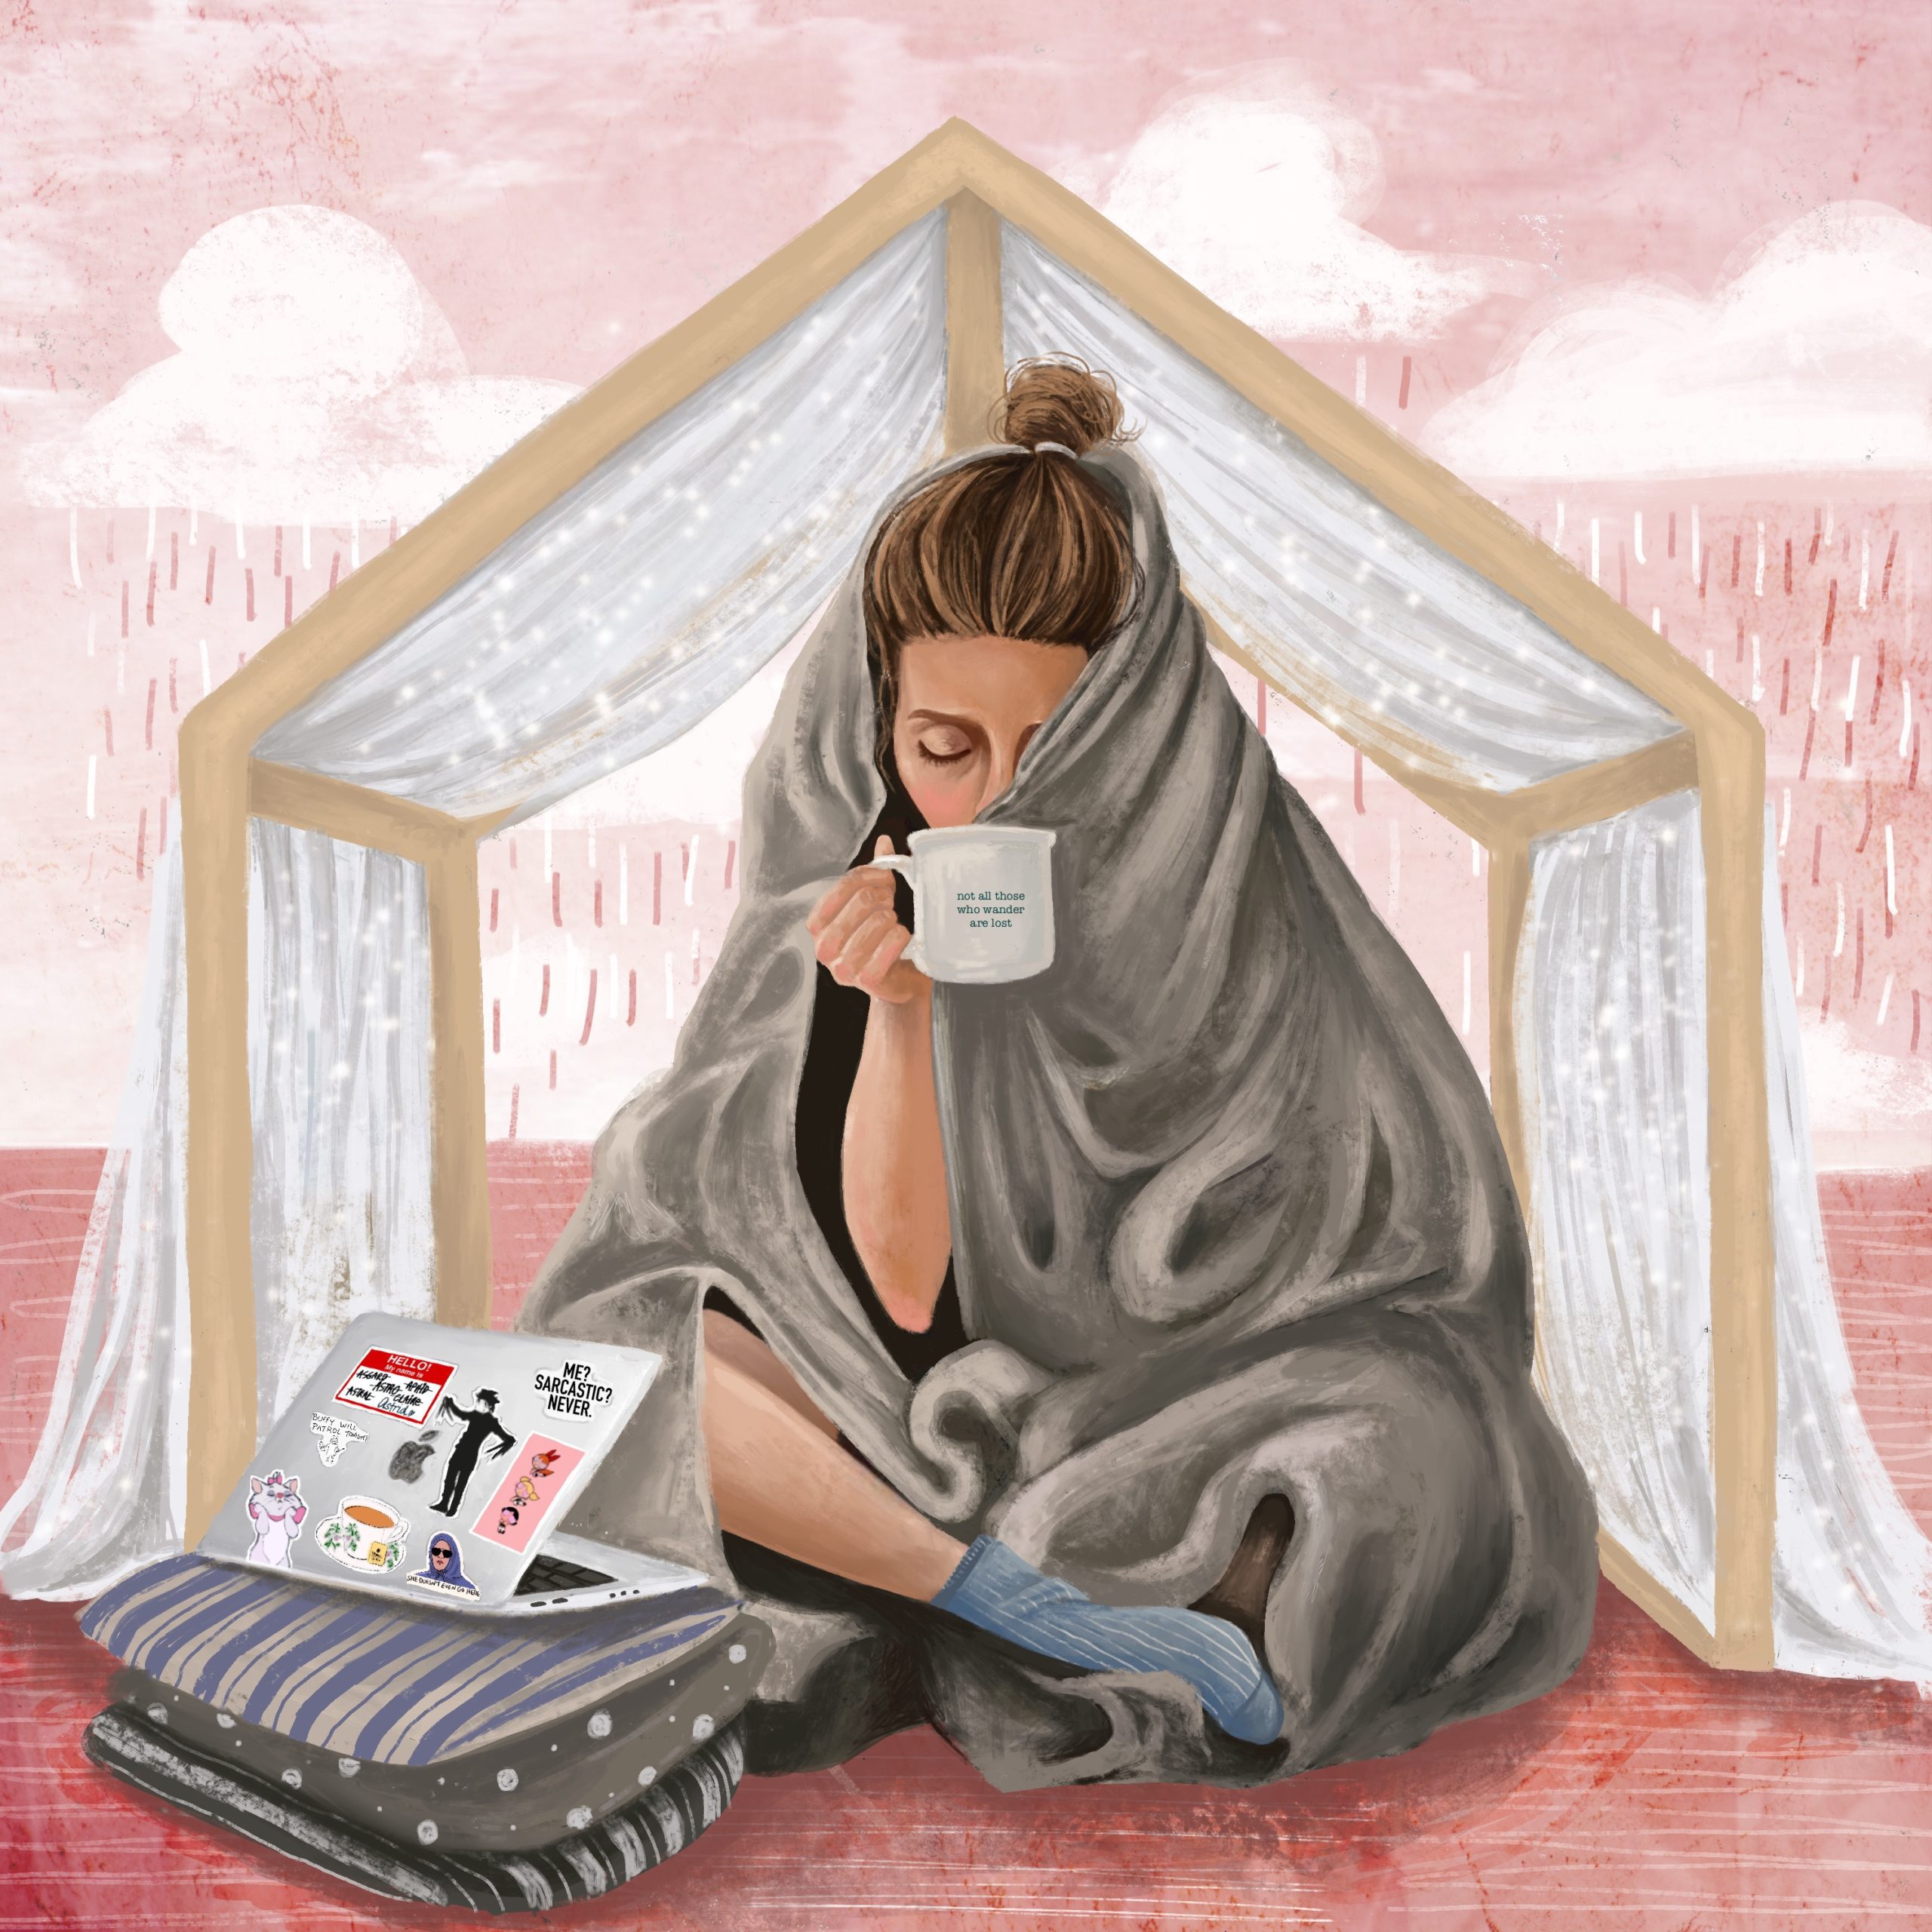 She was nestled in a blanket under a fort of sorts, a wooden frame of a house draped in a twinkling sheer voile. Seated cross-legged on the ground, she clasped awhite mug that read ‘not all who wander are lost’. She customized her pillow-propped laptop with stickers of the Powerpuff Girls and Edward Scissorhands. She was working from home.